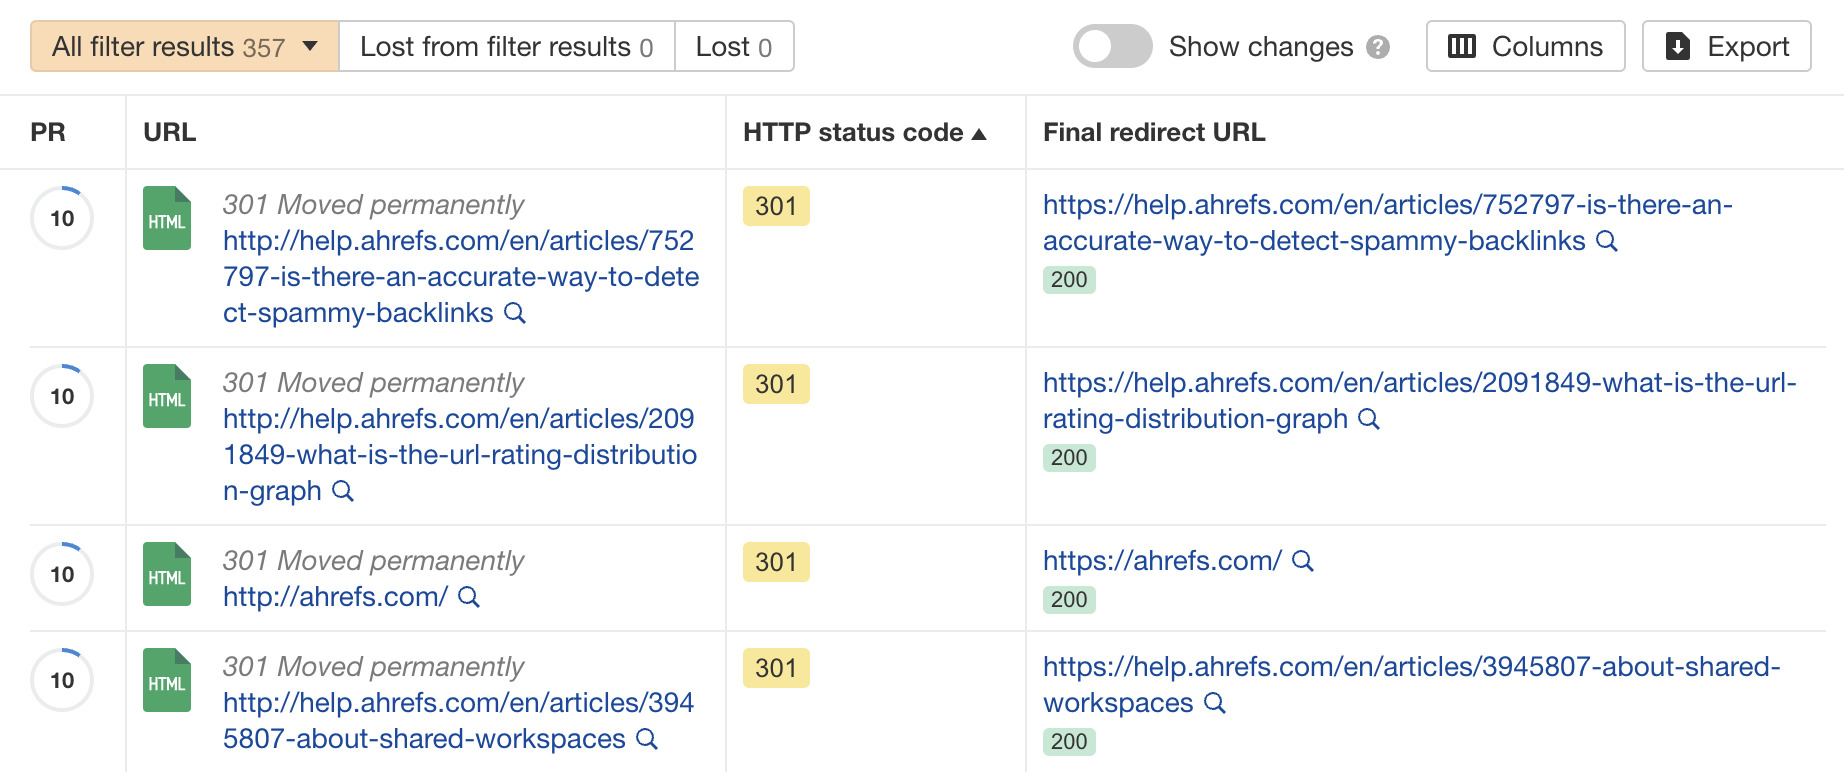 Investigating HTTP status code issues in Ahrefs' Site Audit
